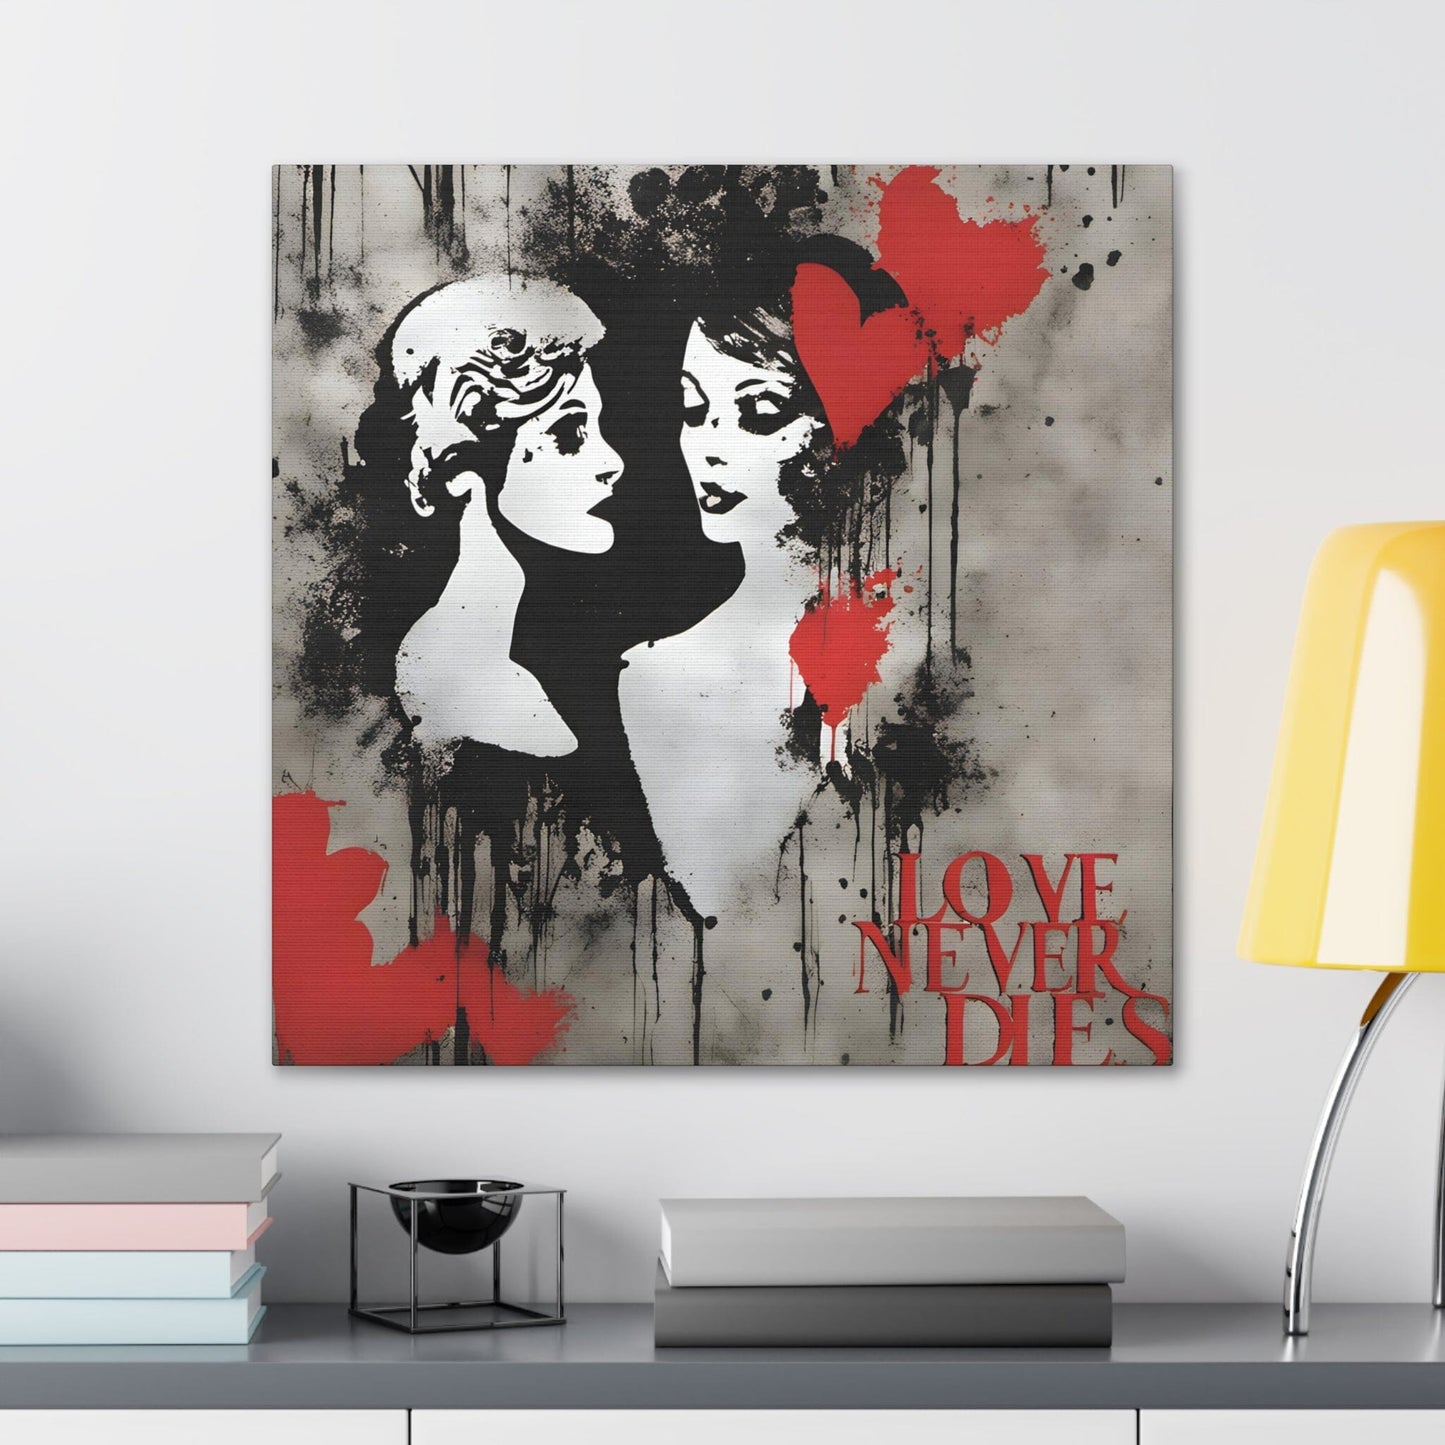 Aria Muralis. Eternal Embrace. Exclusive Graphic Art Canvas Print. in situ with desk